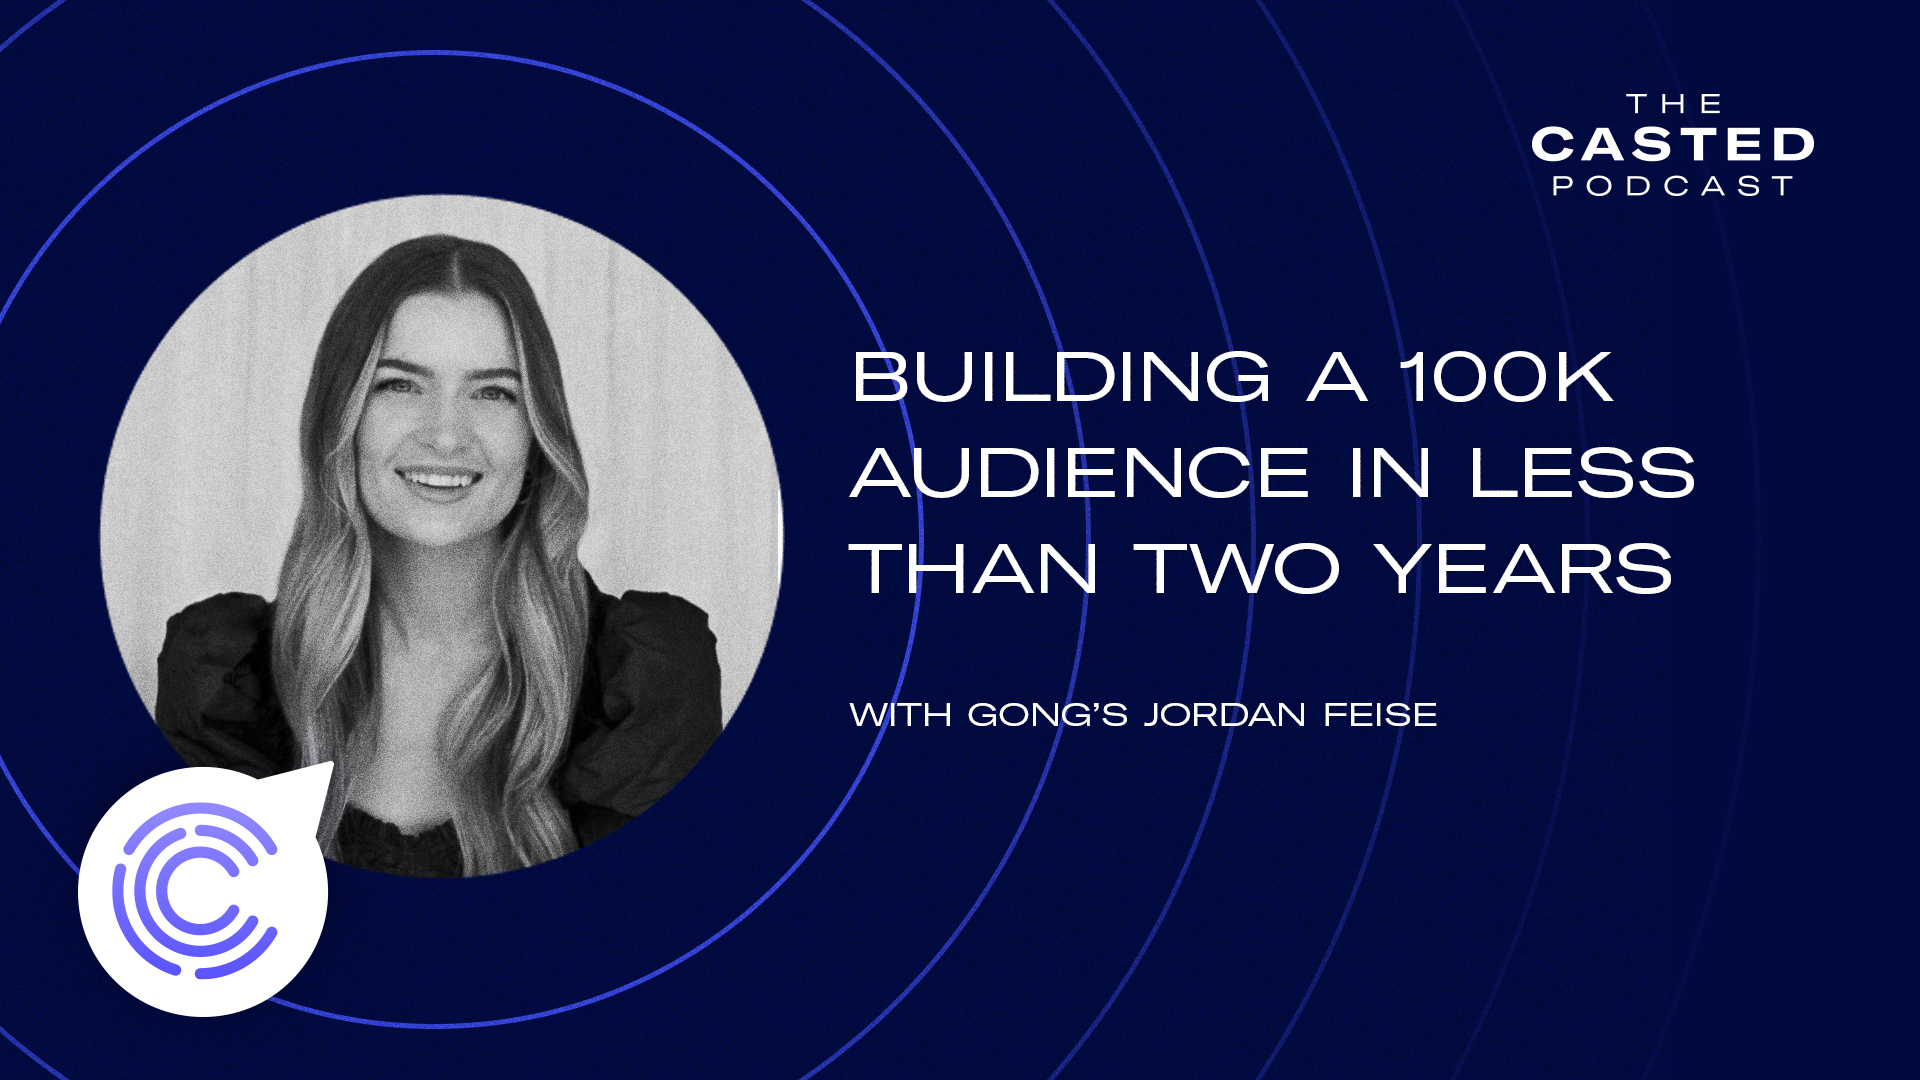 Building a 100K Audience in Less Than Two Years with Gong's Jordan Feise